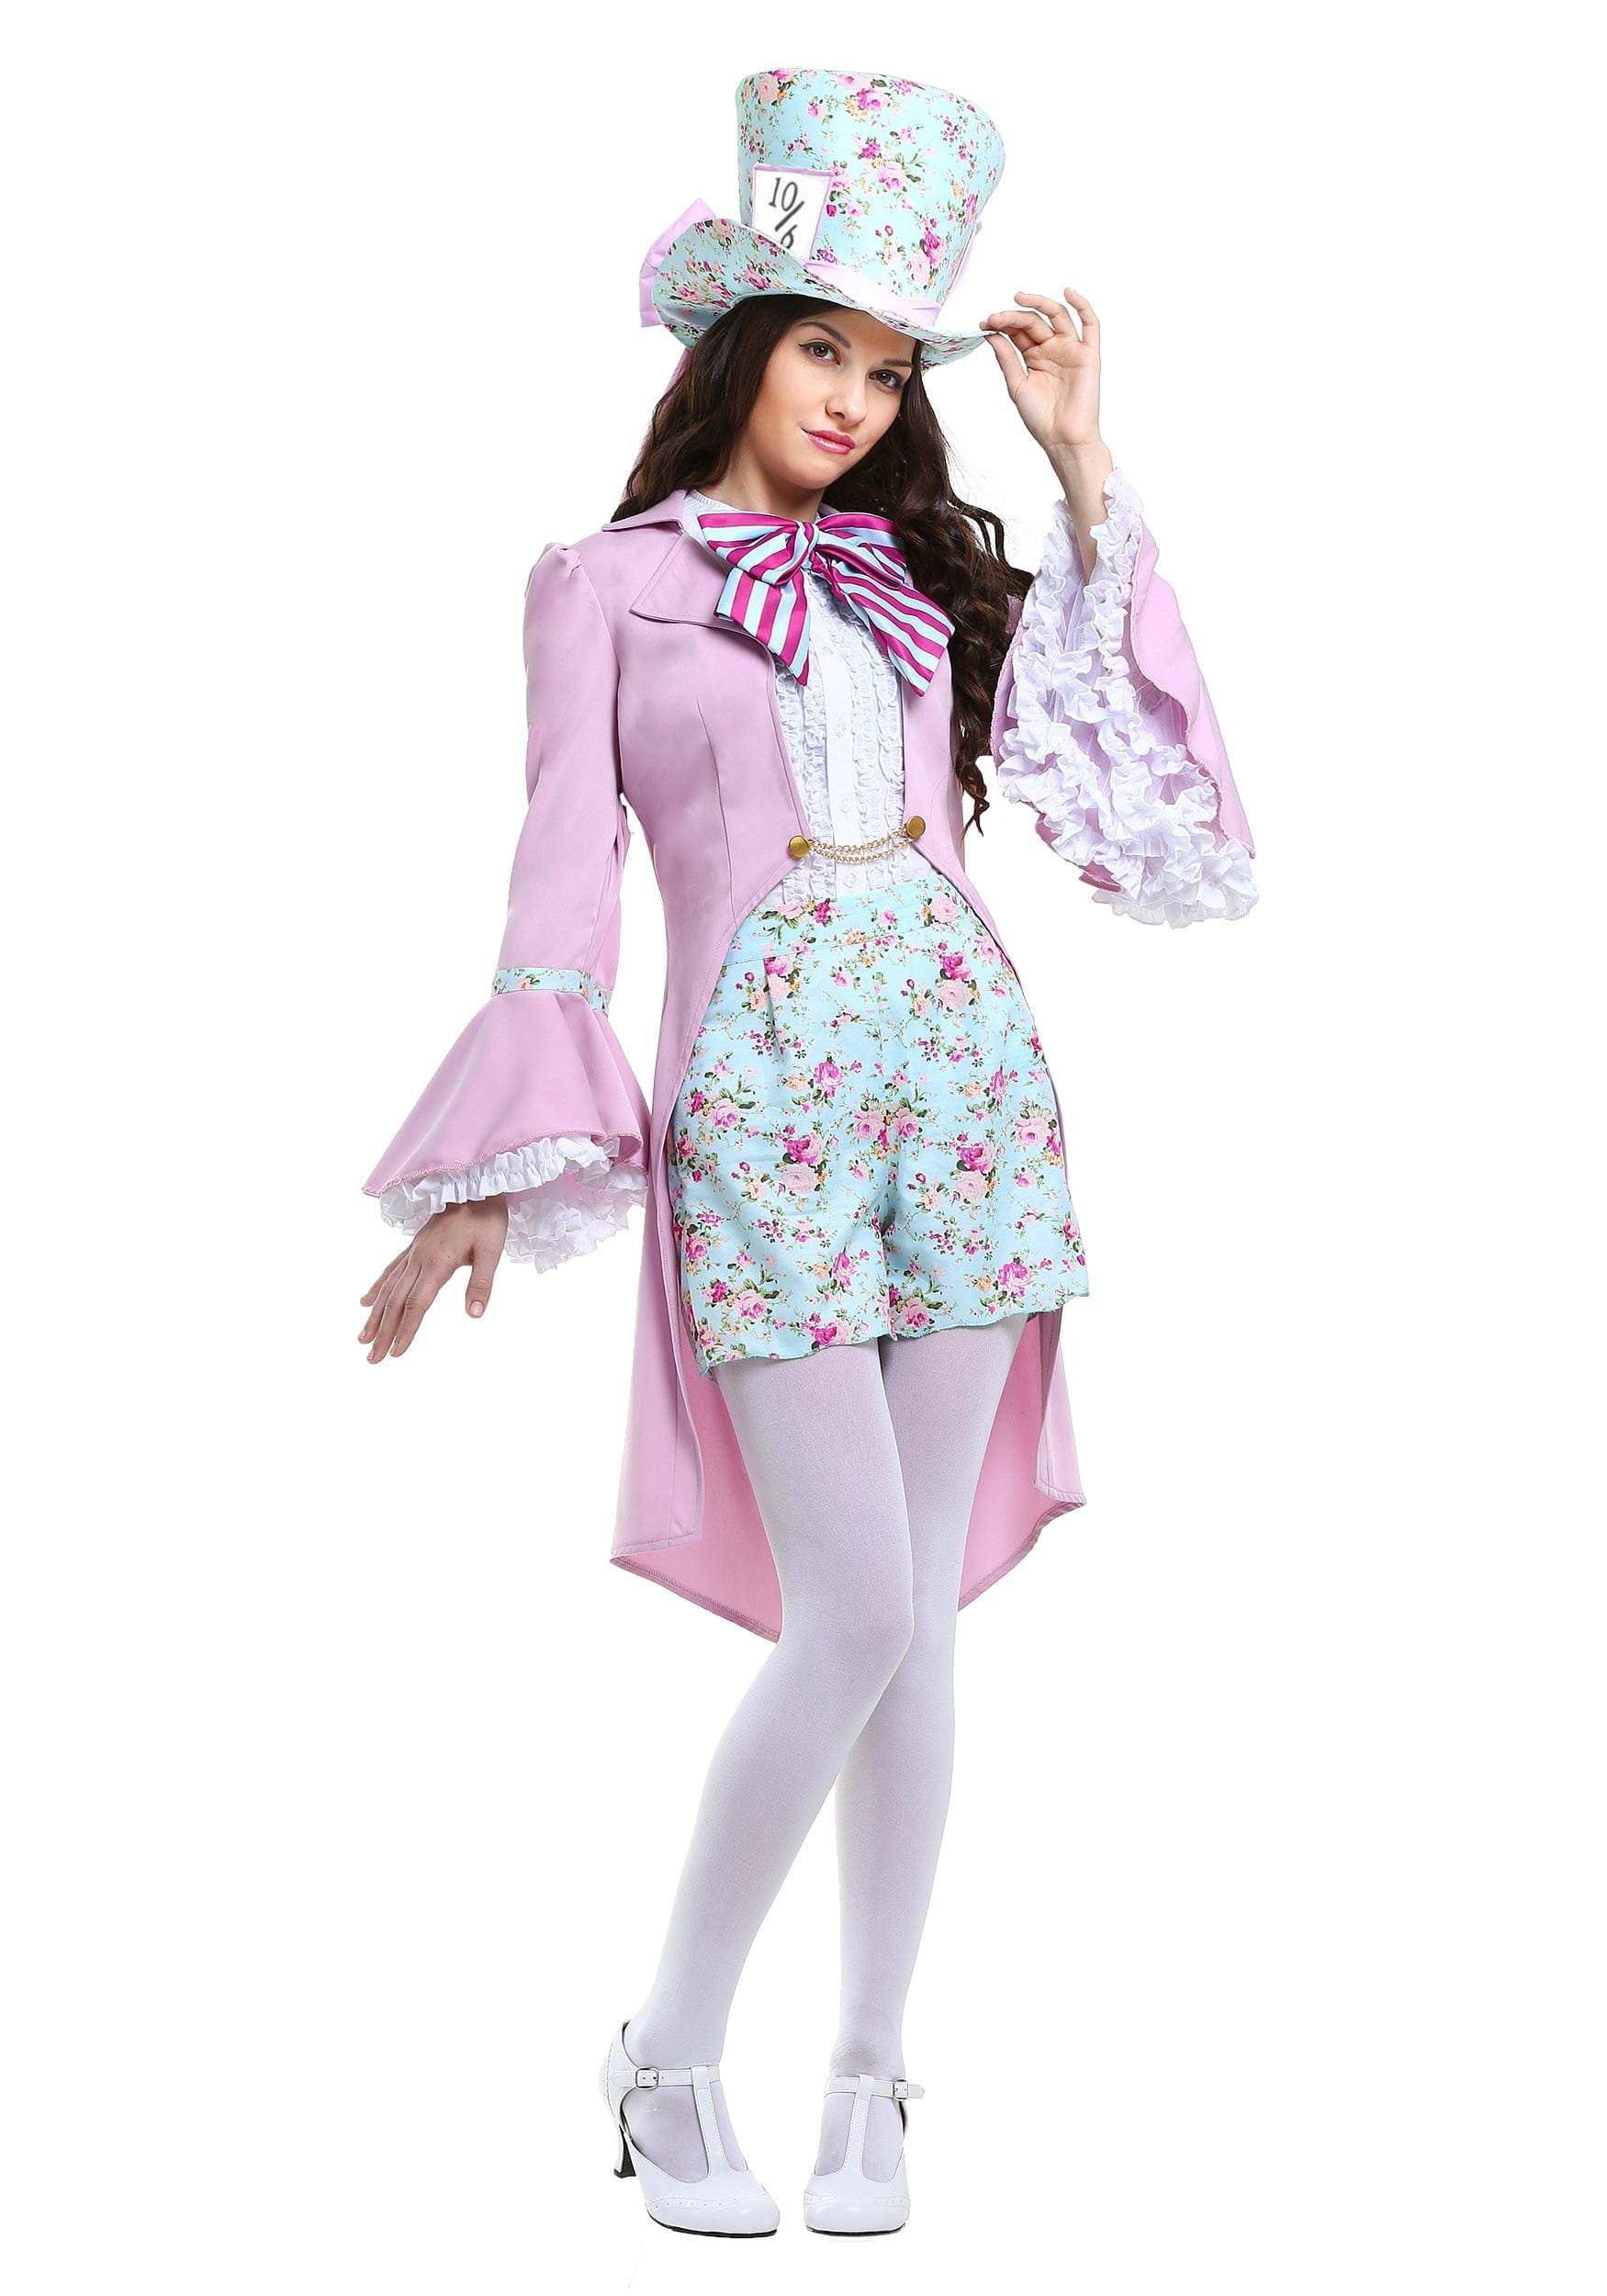 Image of Pretty Mad Hatter Costume for Women ID FUN0241AD-XL